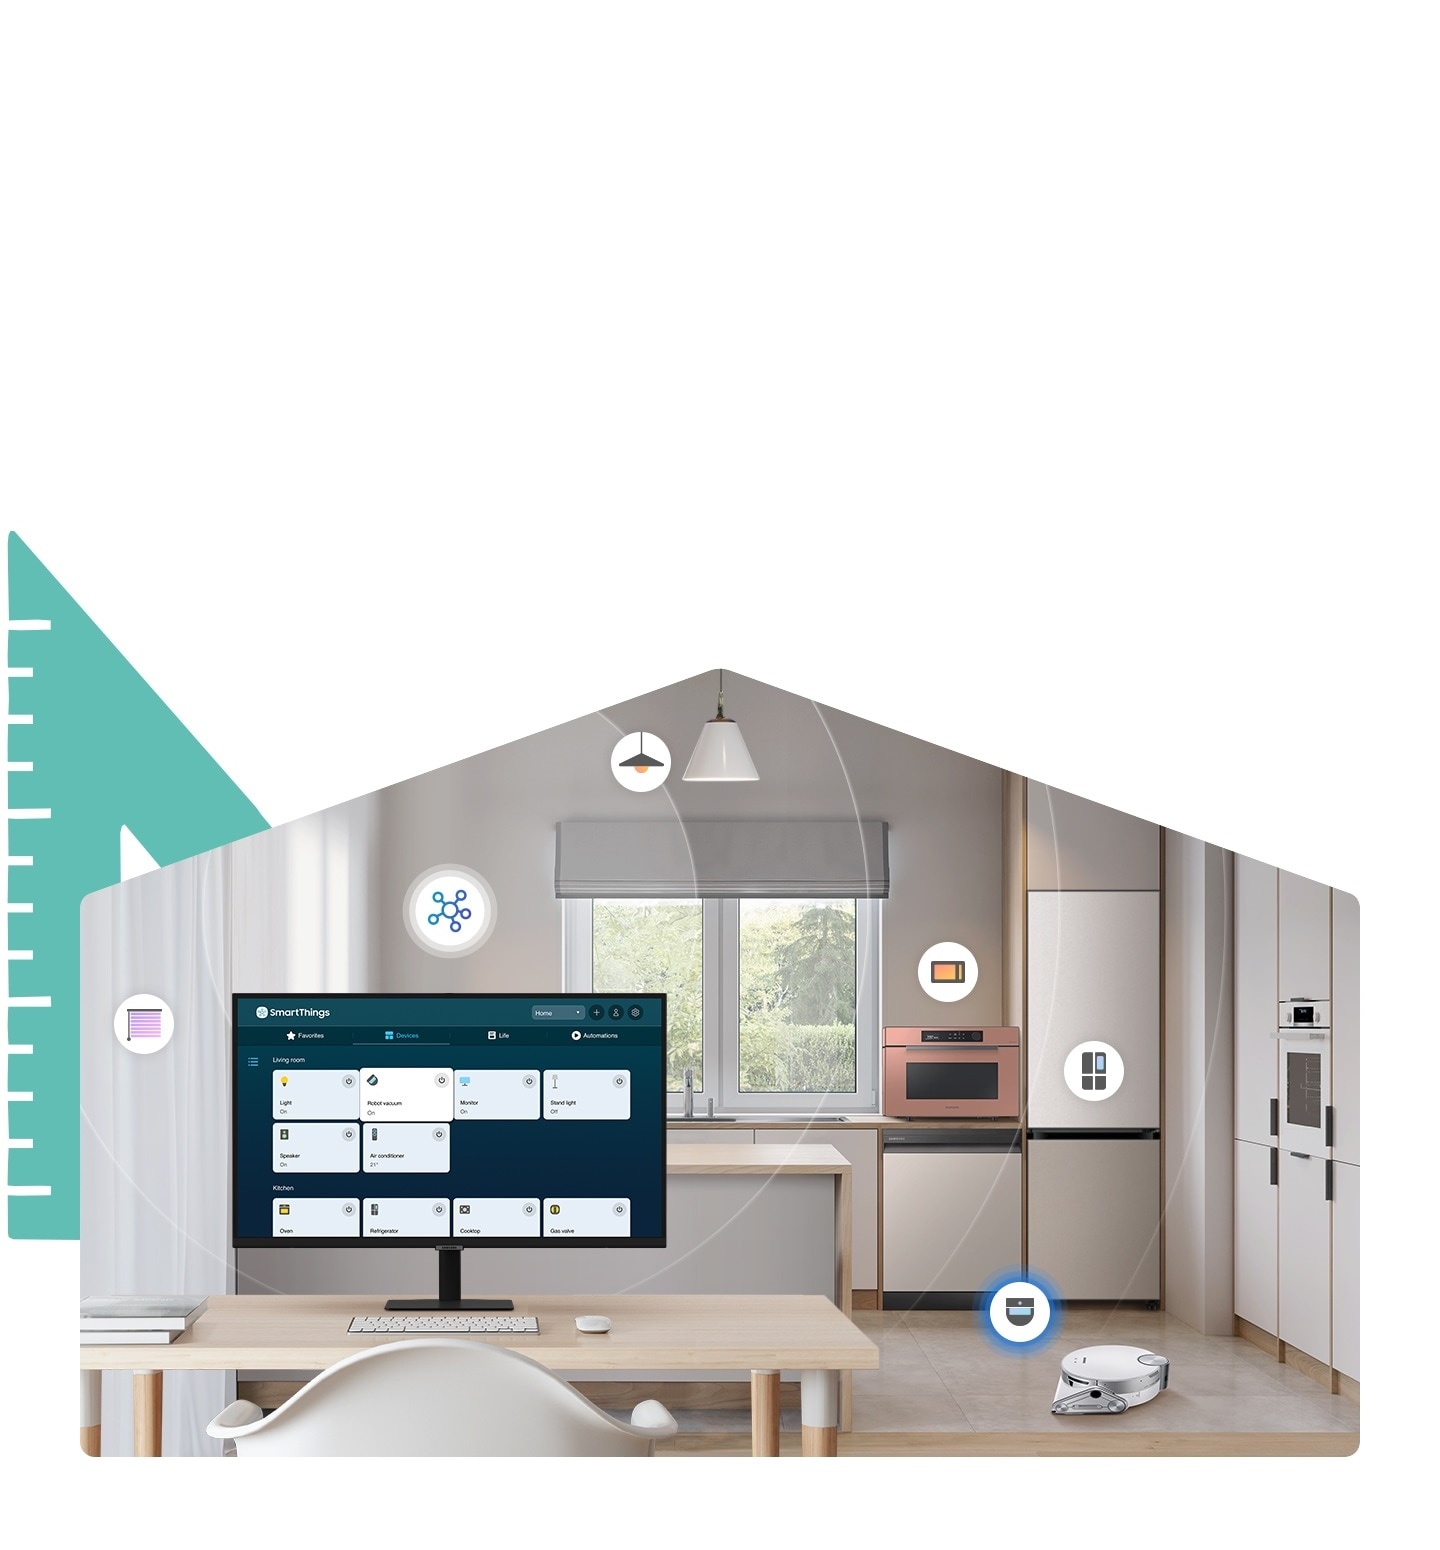 A room contains a desk with a monitor on top, a smart light, a smart curtain, a smart robot vacuum, a smart oven and a smart fridge. Above each smart home item is an icon representing each item.